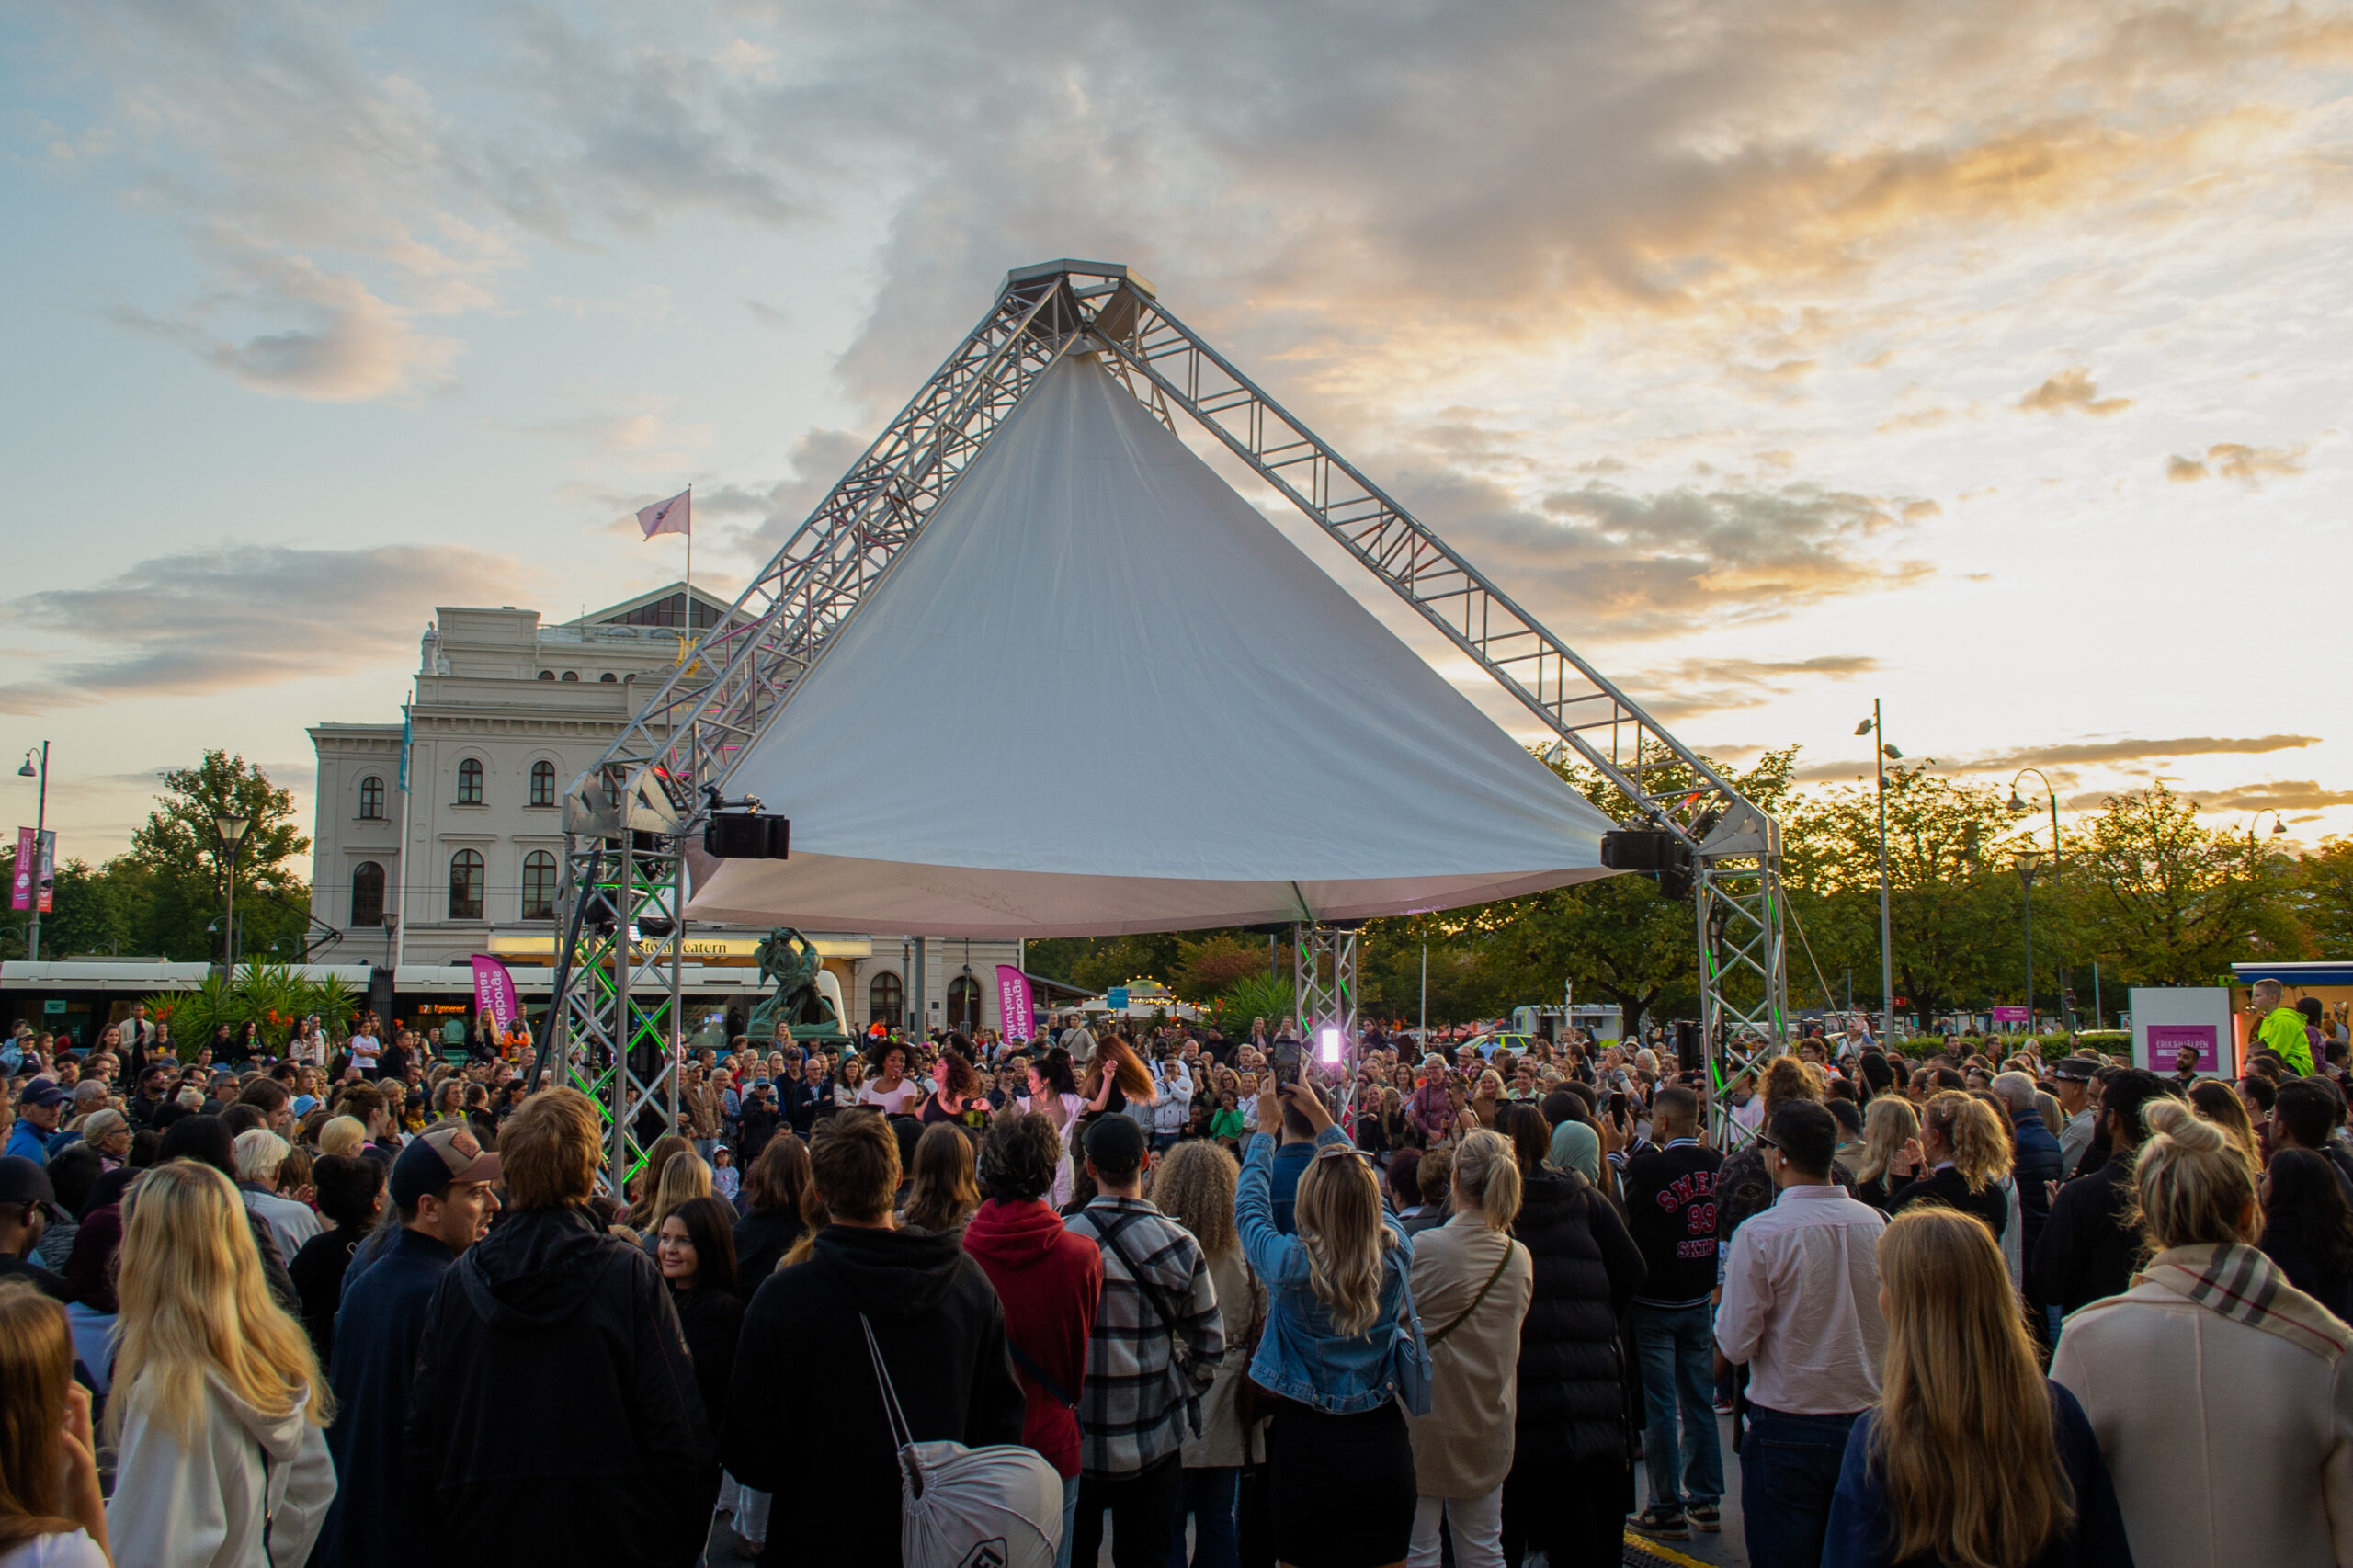 A smaller stage with a large white roof in Bältespännarparken. People perform on stage and the audience stands around the stage. The photo was taken at sunset. In the background you can see the Stora Teatern and a tram passing by.